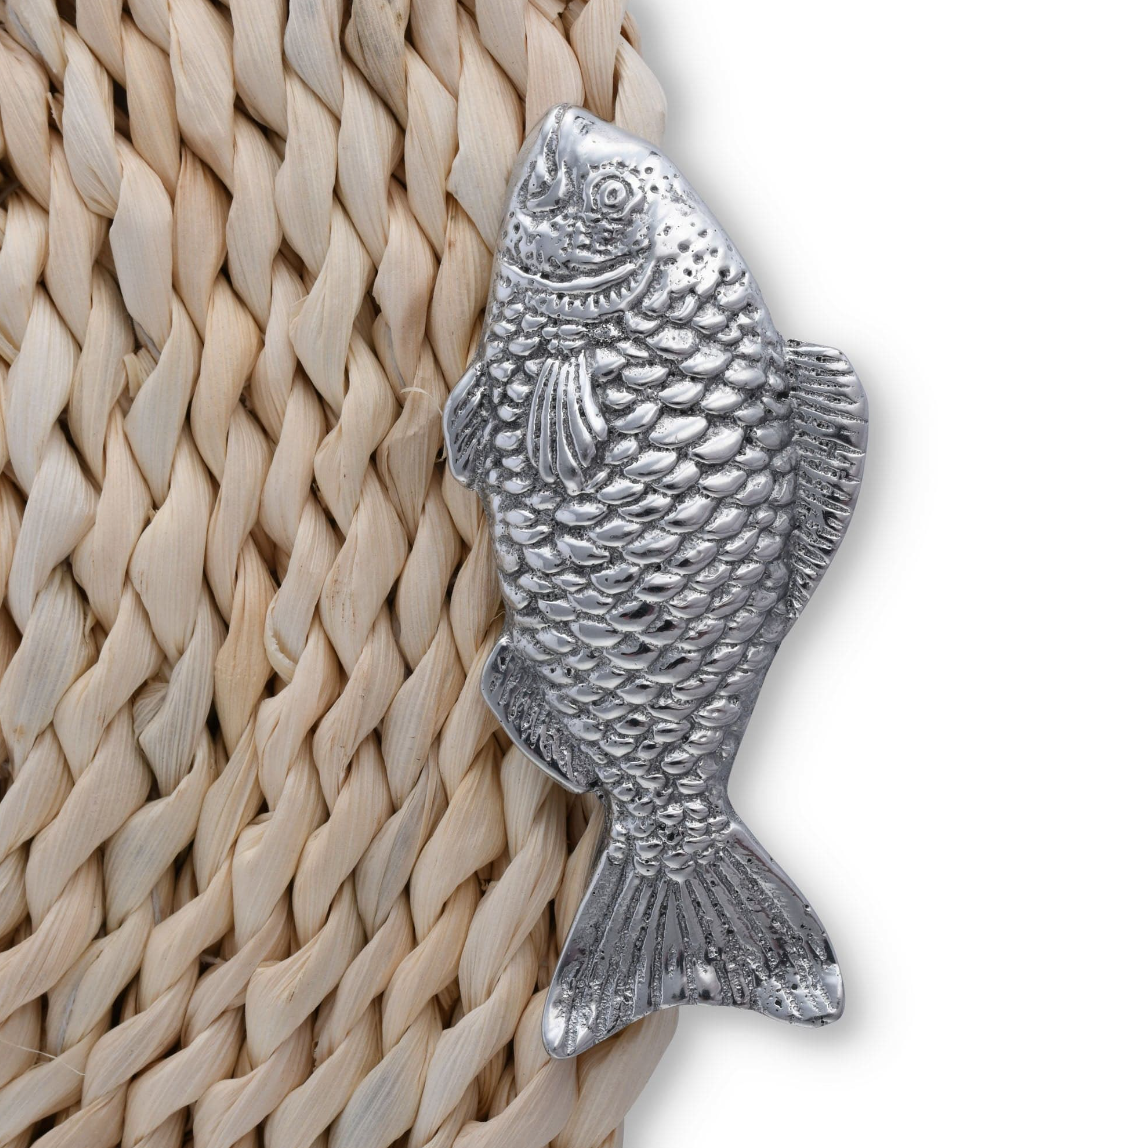 FISH TWISTED SEAGRASS PLACEMATS - SET OF 4